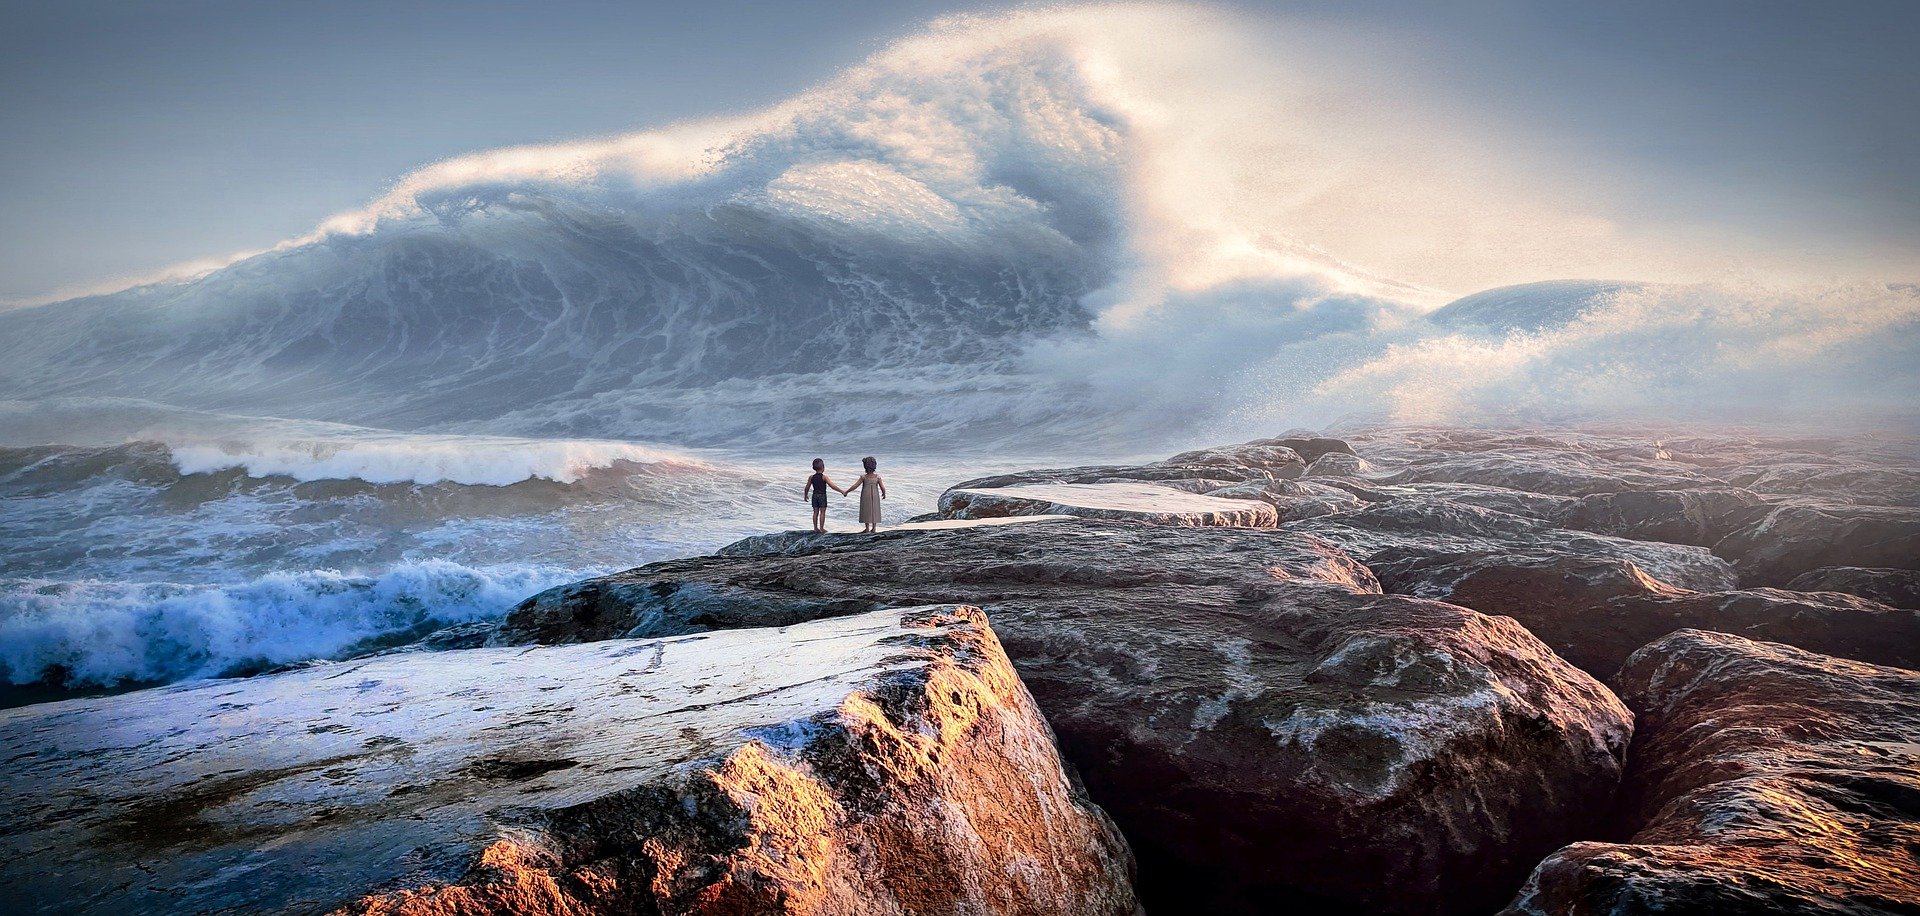 Fantasy-style image of two young children holding hands, as a giant flood wave approaches